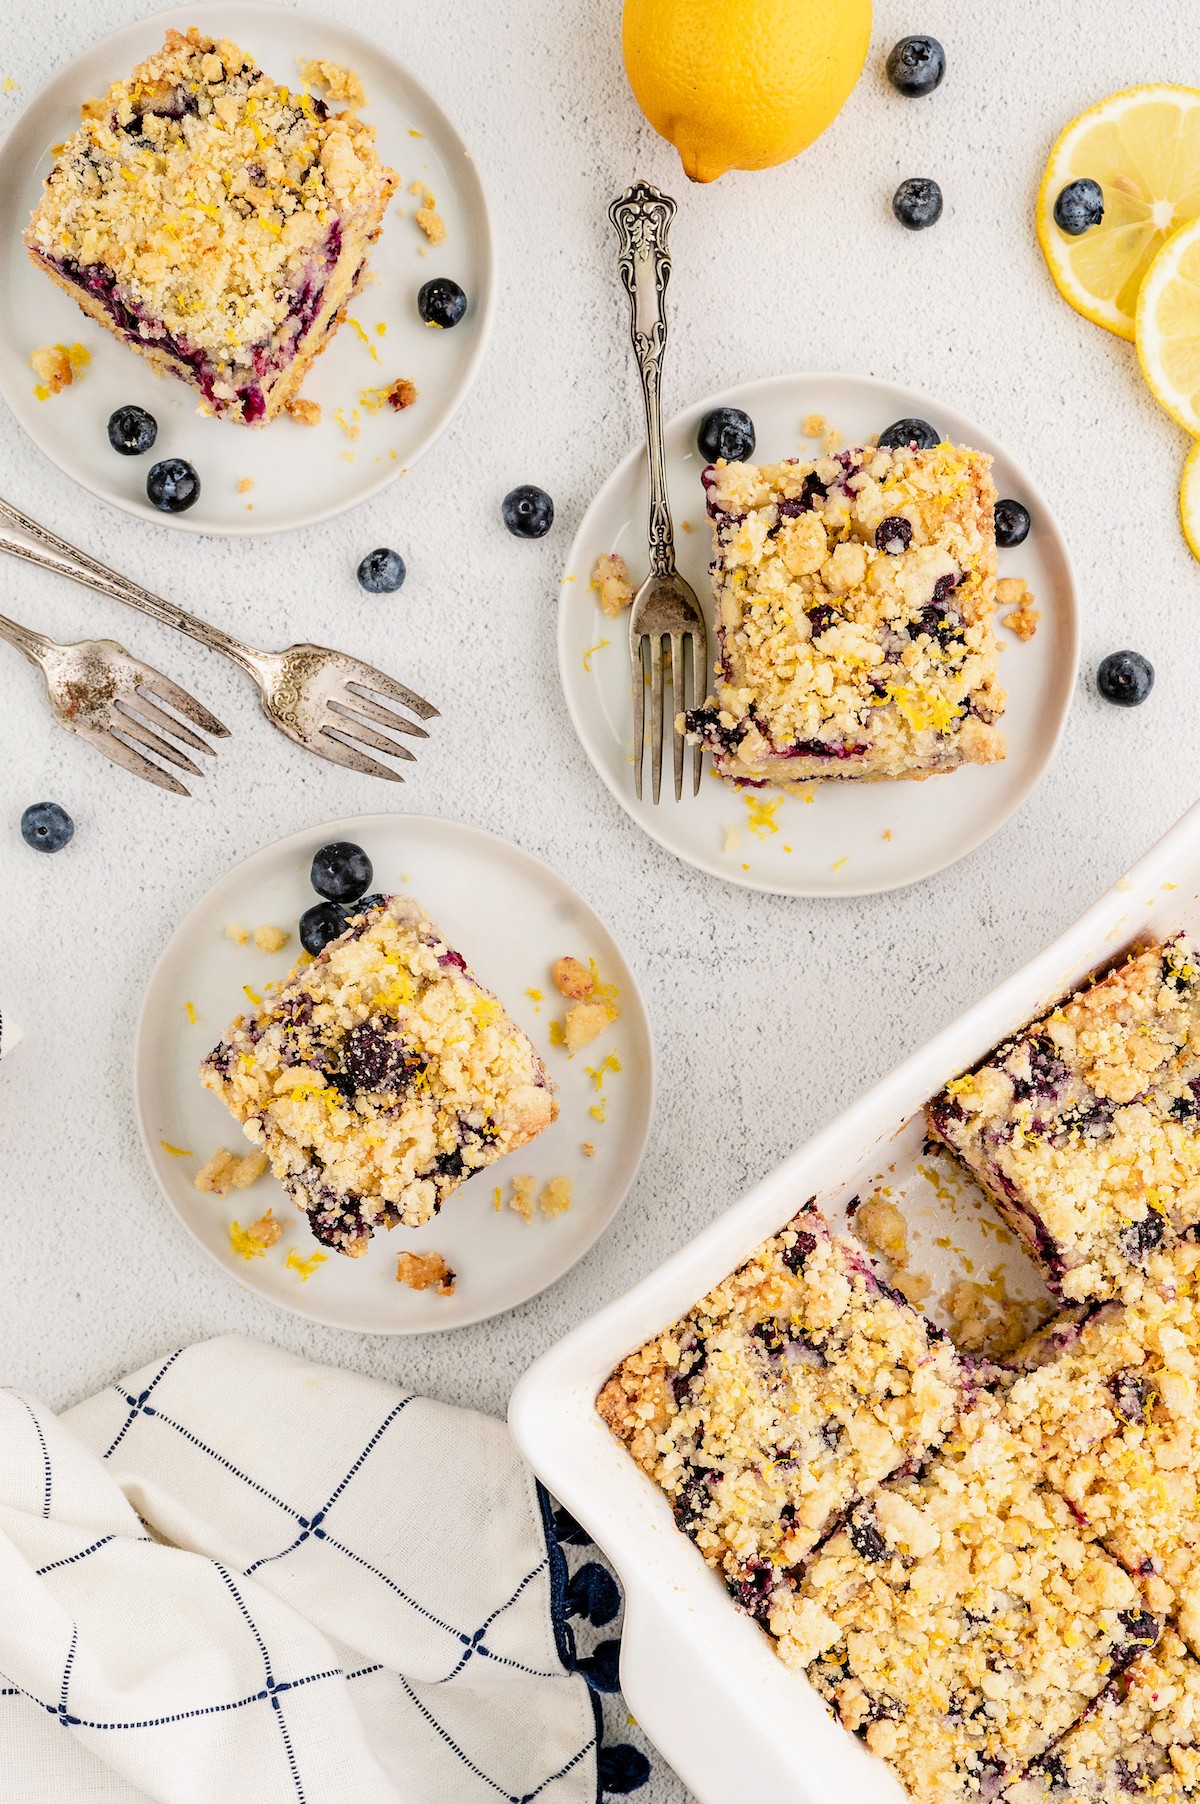 Overhead view of squares of lemon blueberry cake on plates